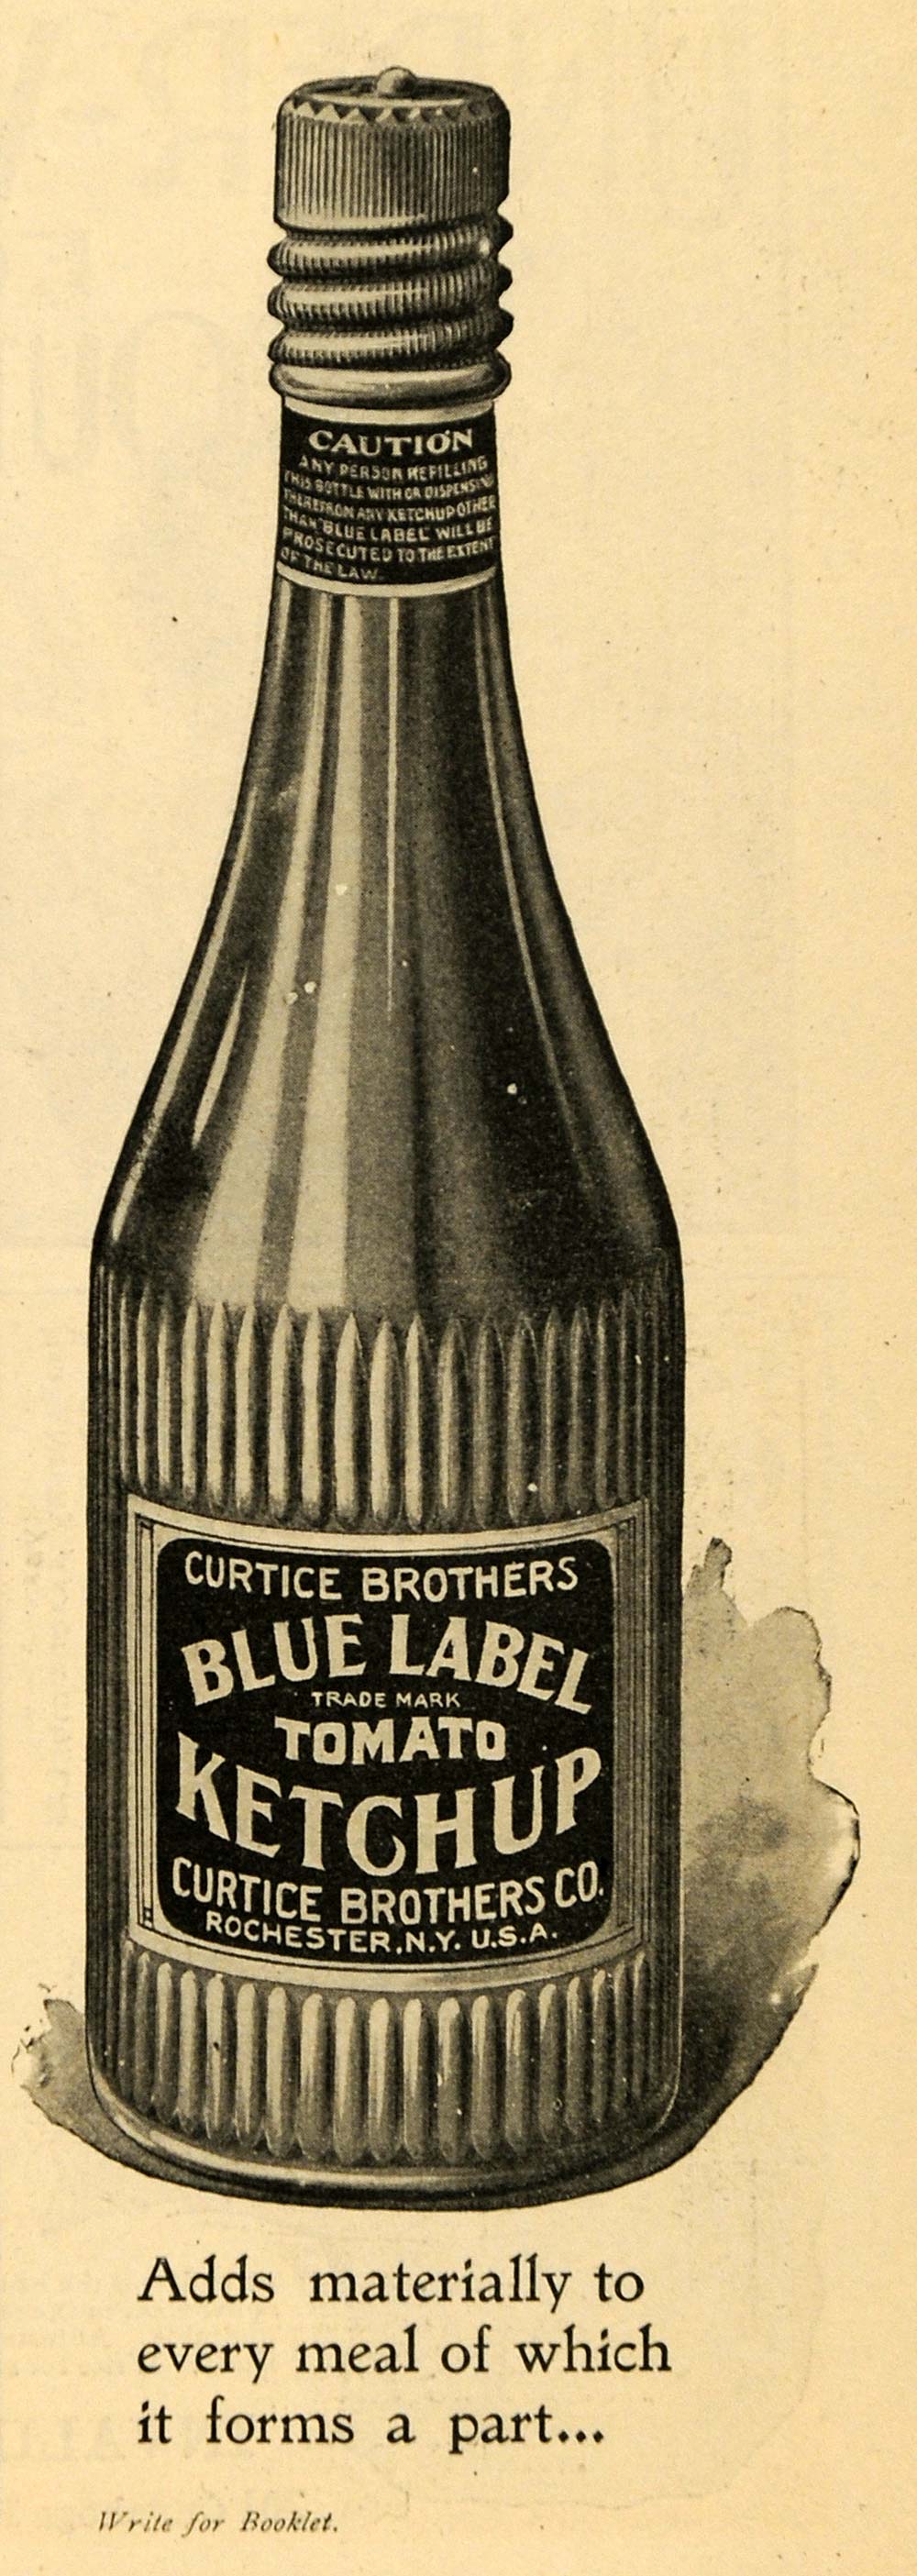 1898 Ad Curtice Brothers Co Blue Label Tomato Ketchup - ORIGINAL TOM3